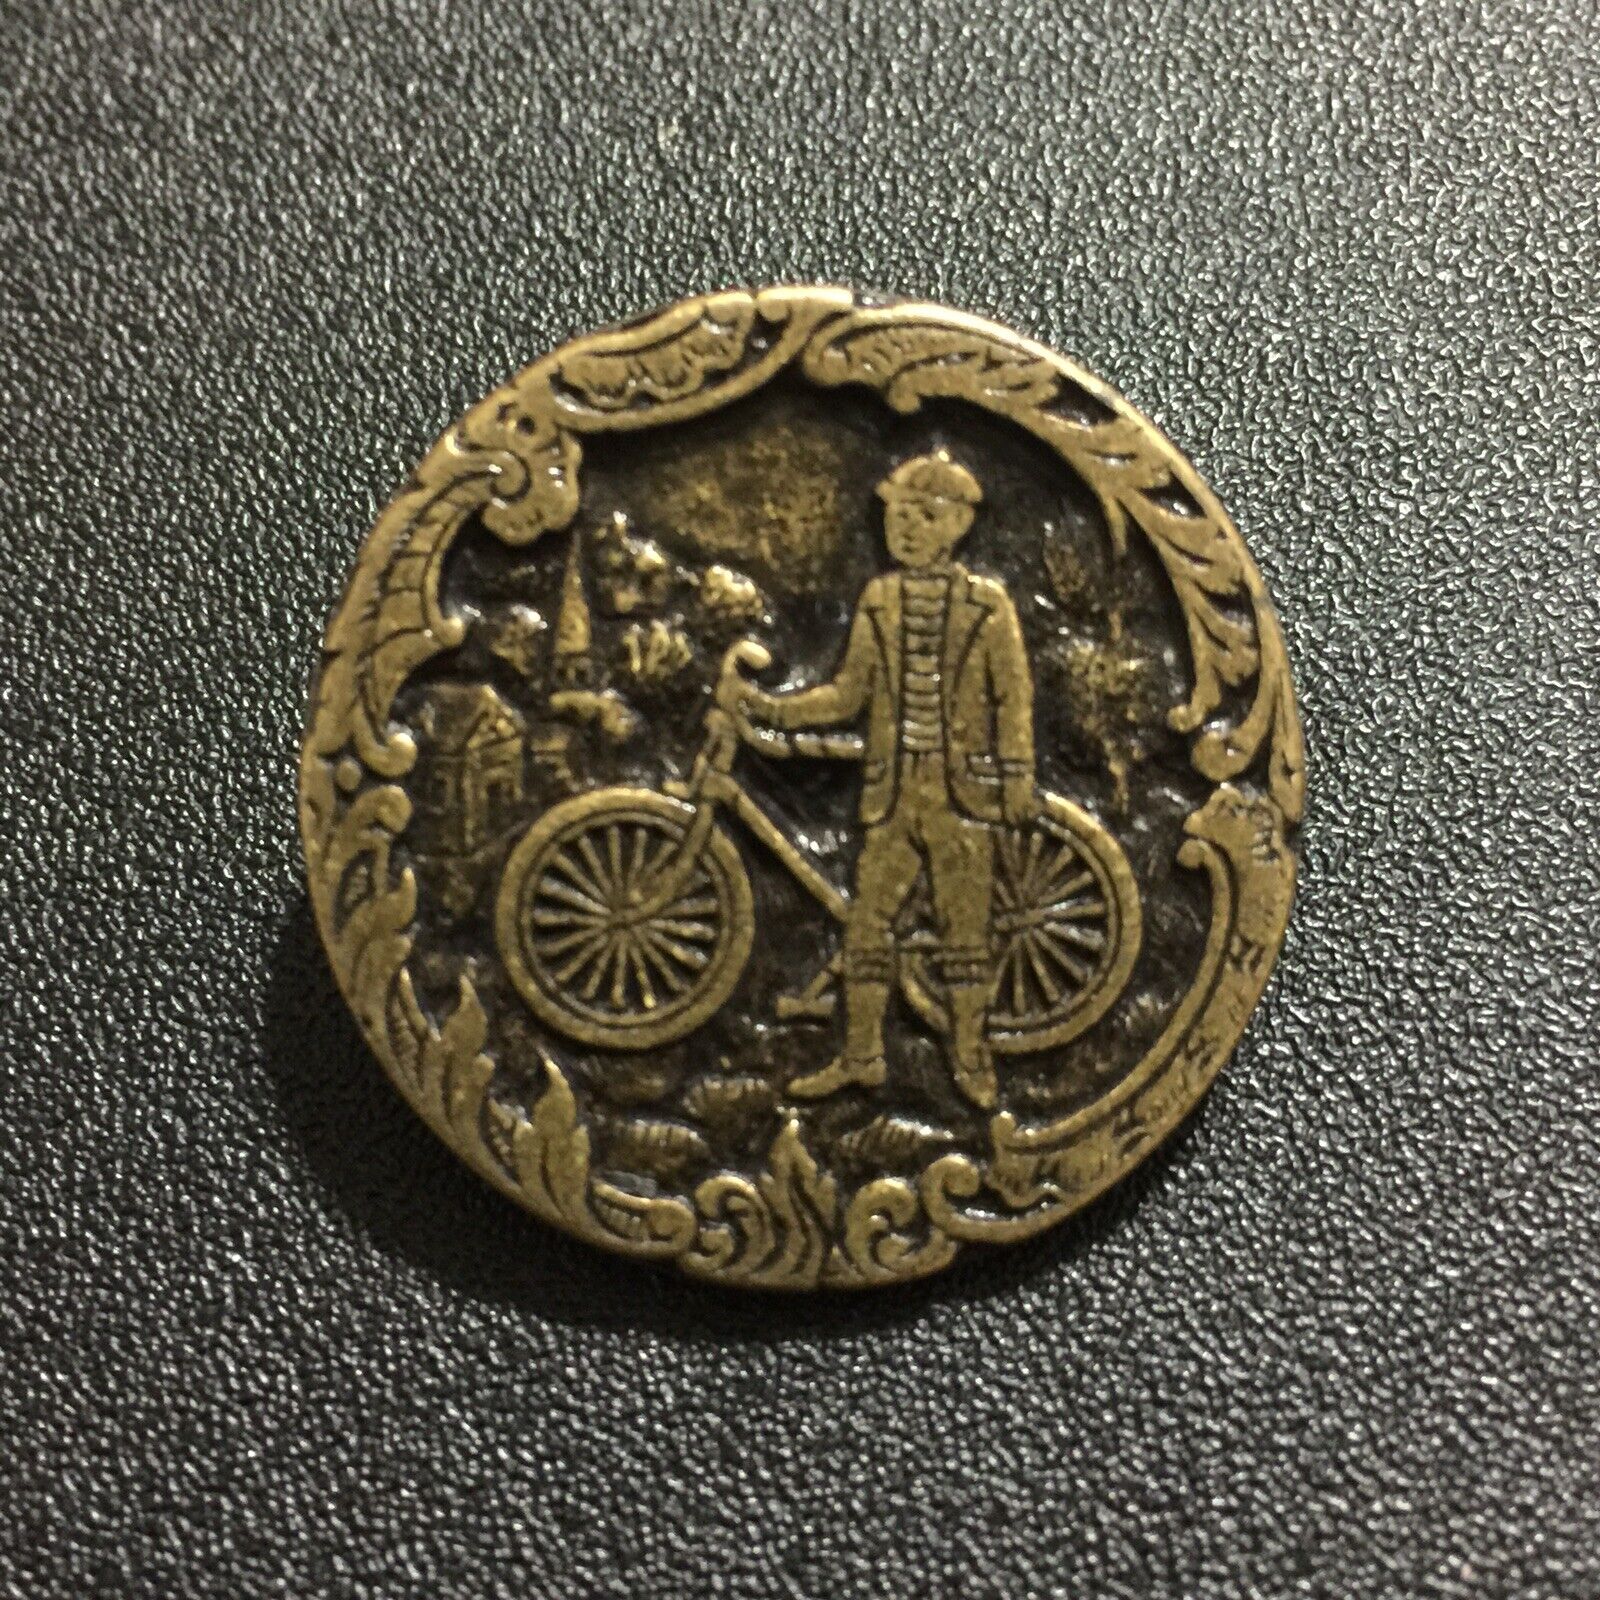 Vintage Brass Button Man Standing Next to Bicycle Framed by Floral Design